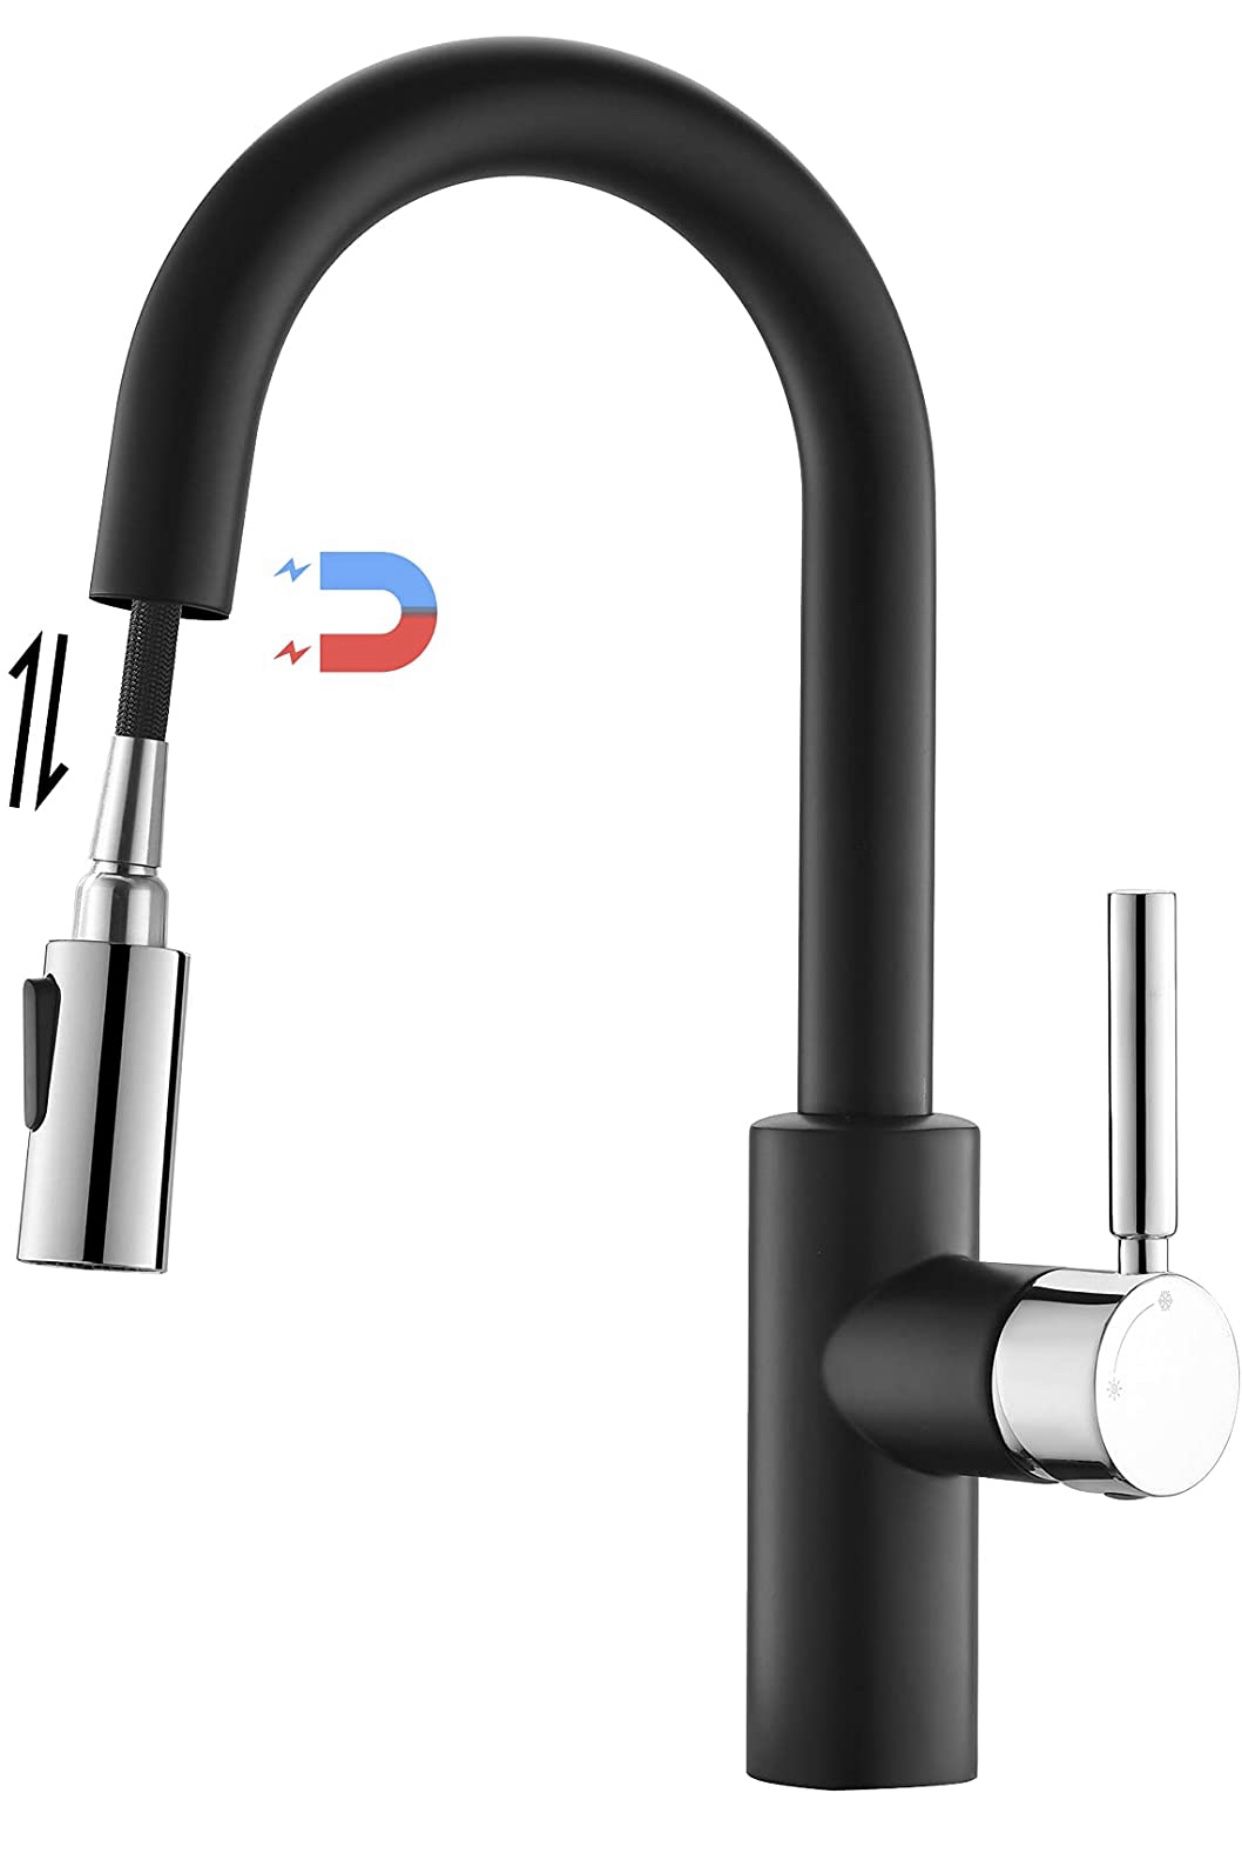 Black Kitchen Sink Faucet, Kitchen Faucets with Magnetic Pull Down Sprayer, Bar Sink Faucet with Pull Out Sprayer, Single Level Stainless Steel Laundr